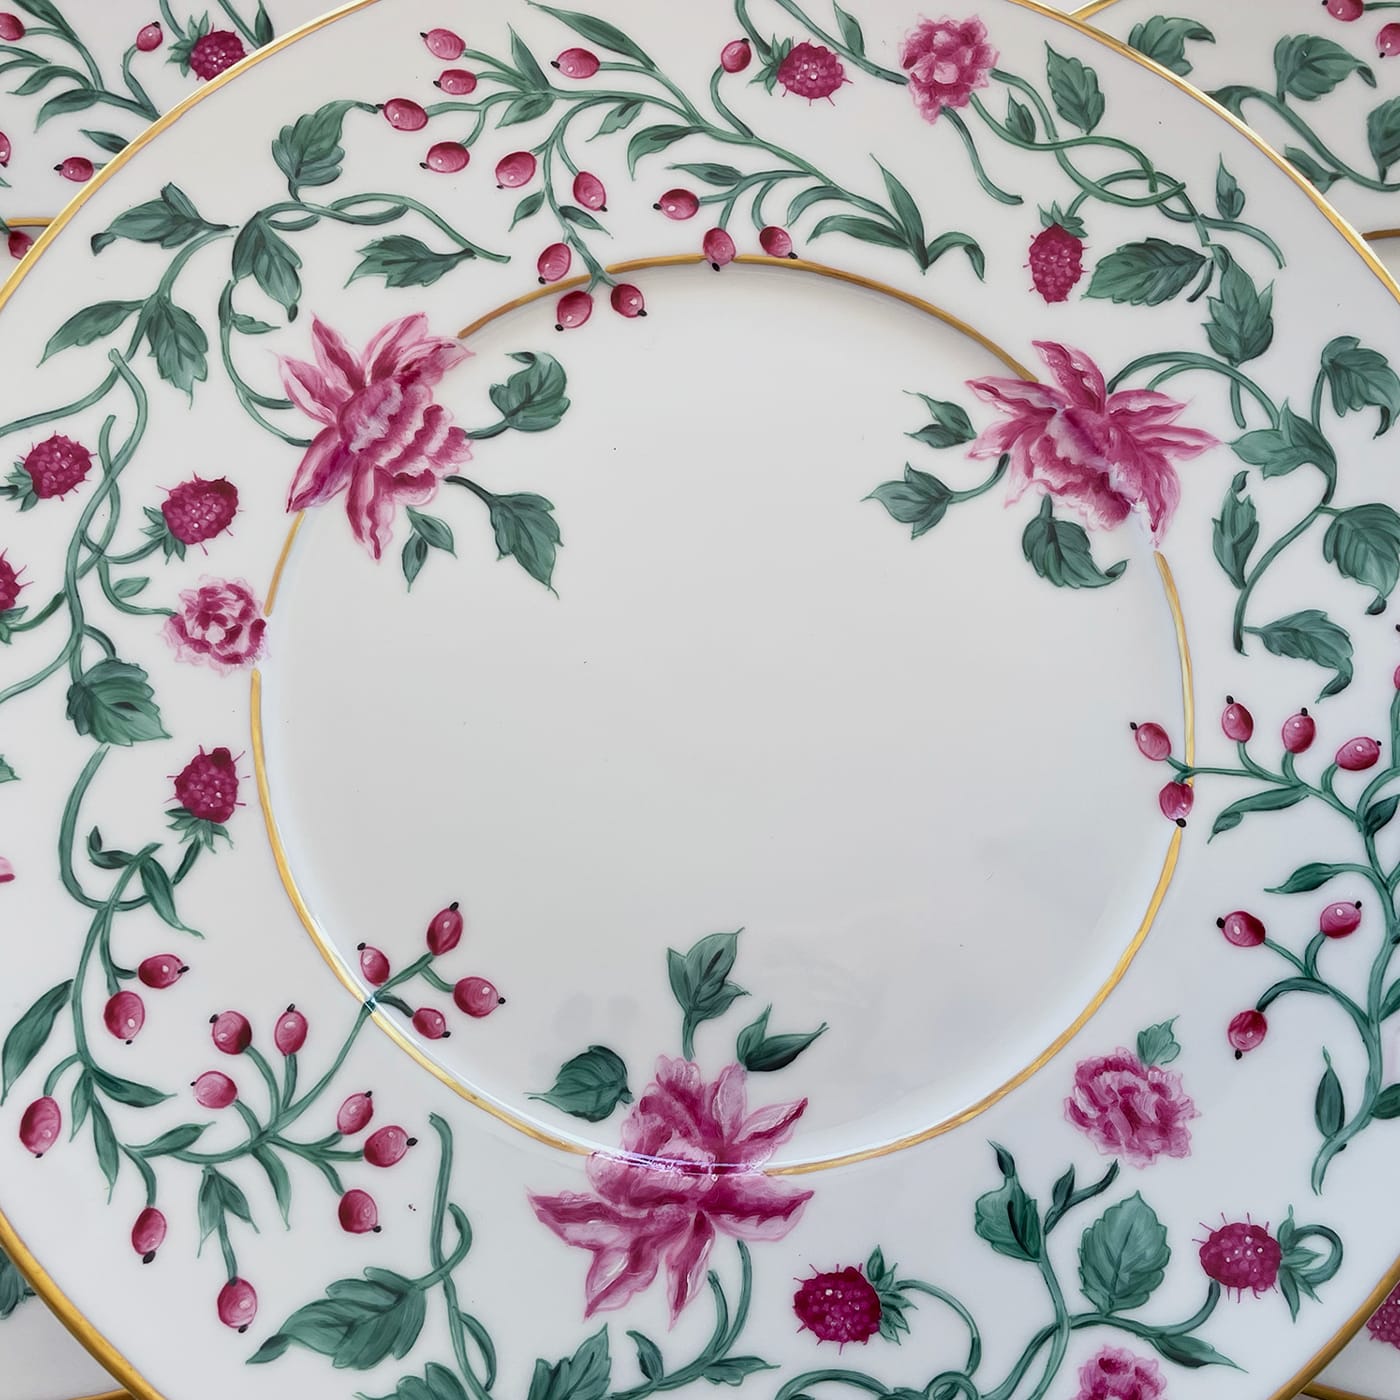 SET OF 6 ROSE BERRY DINNER PLATES - Vio's Cooking